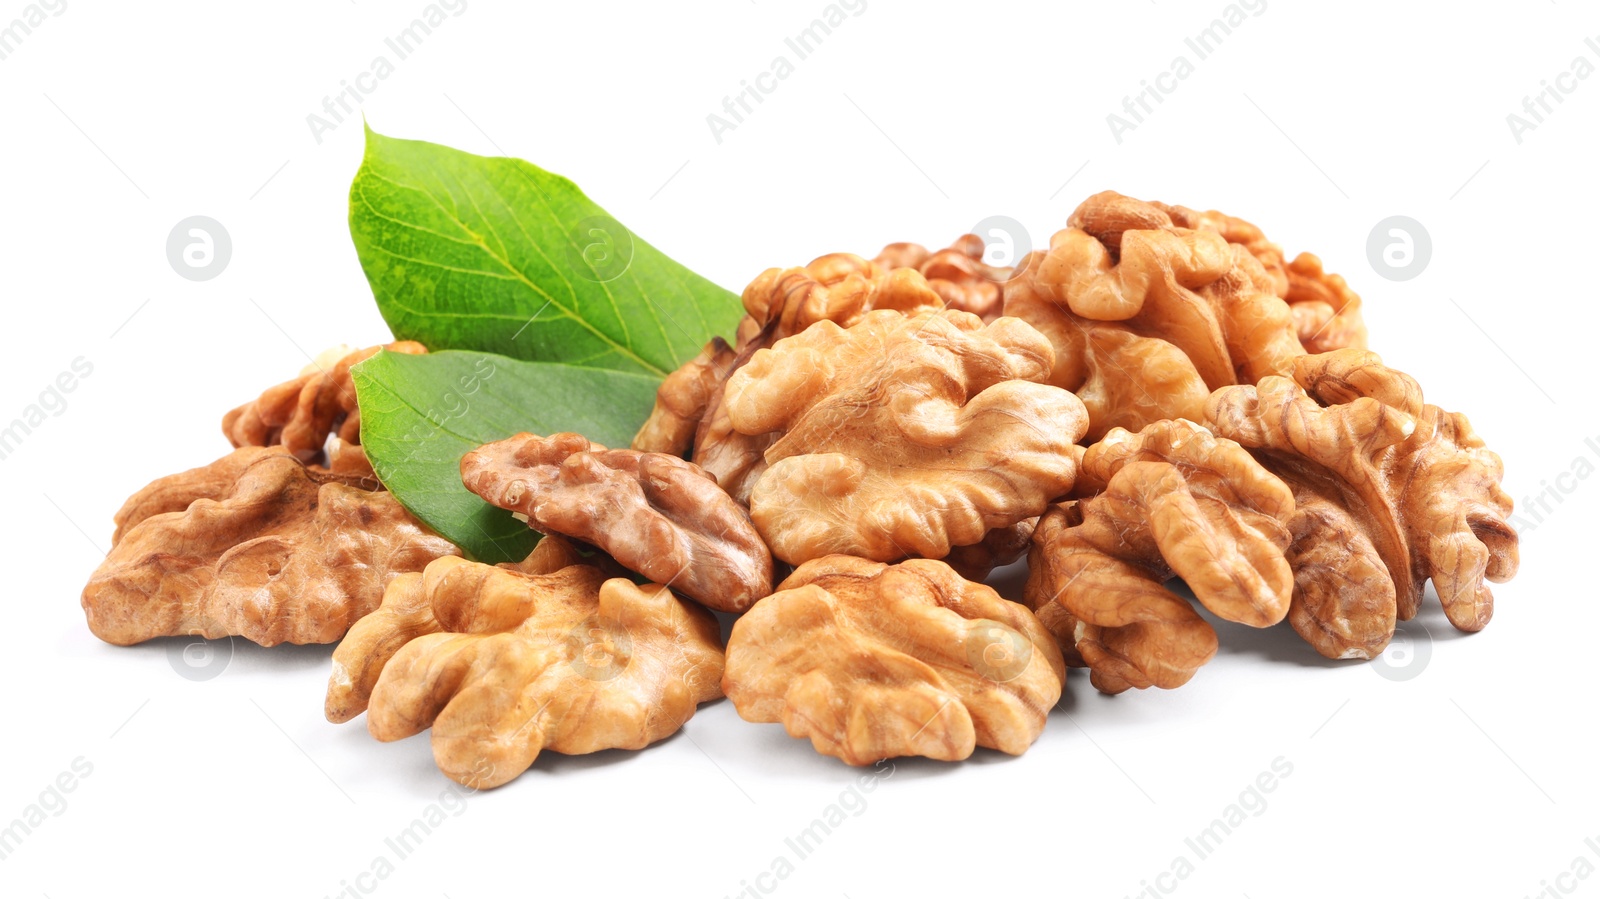 Photo of Pile of peeled walnuts and leaves on white background